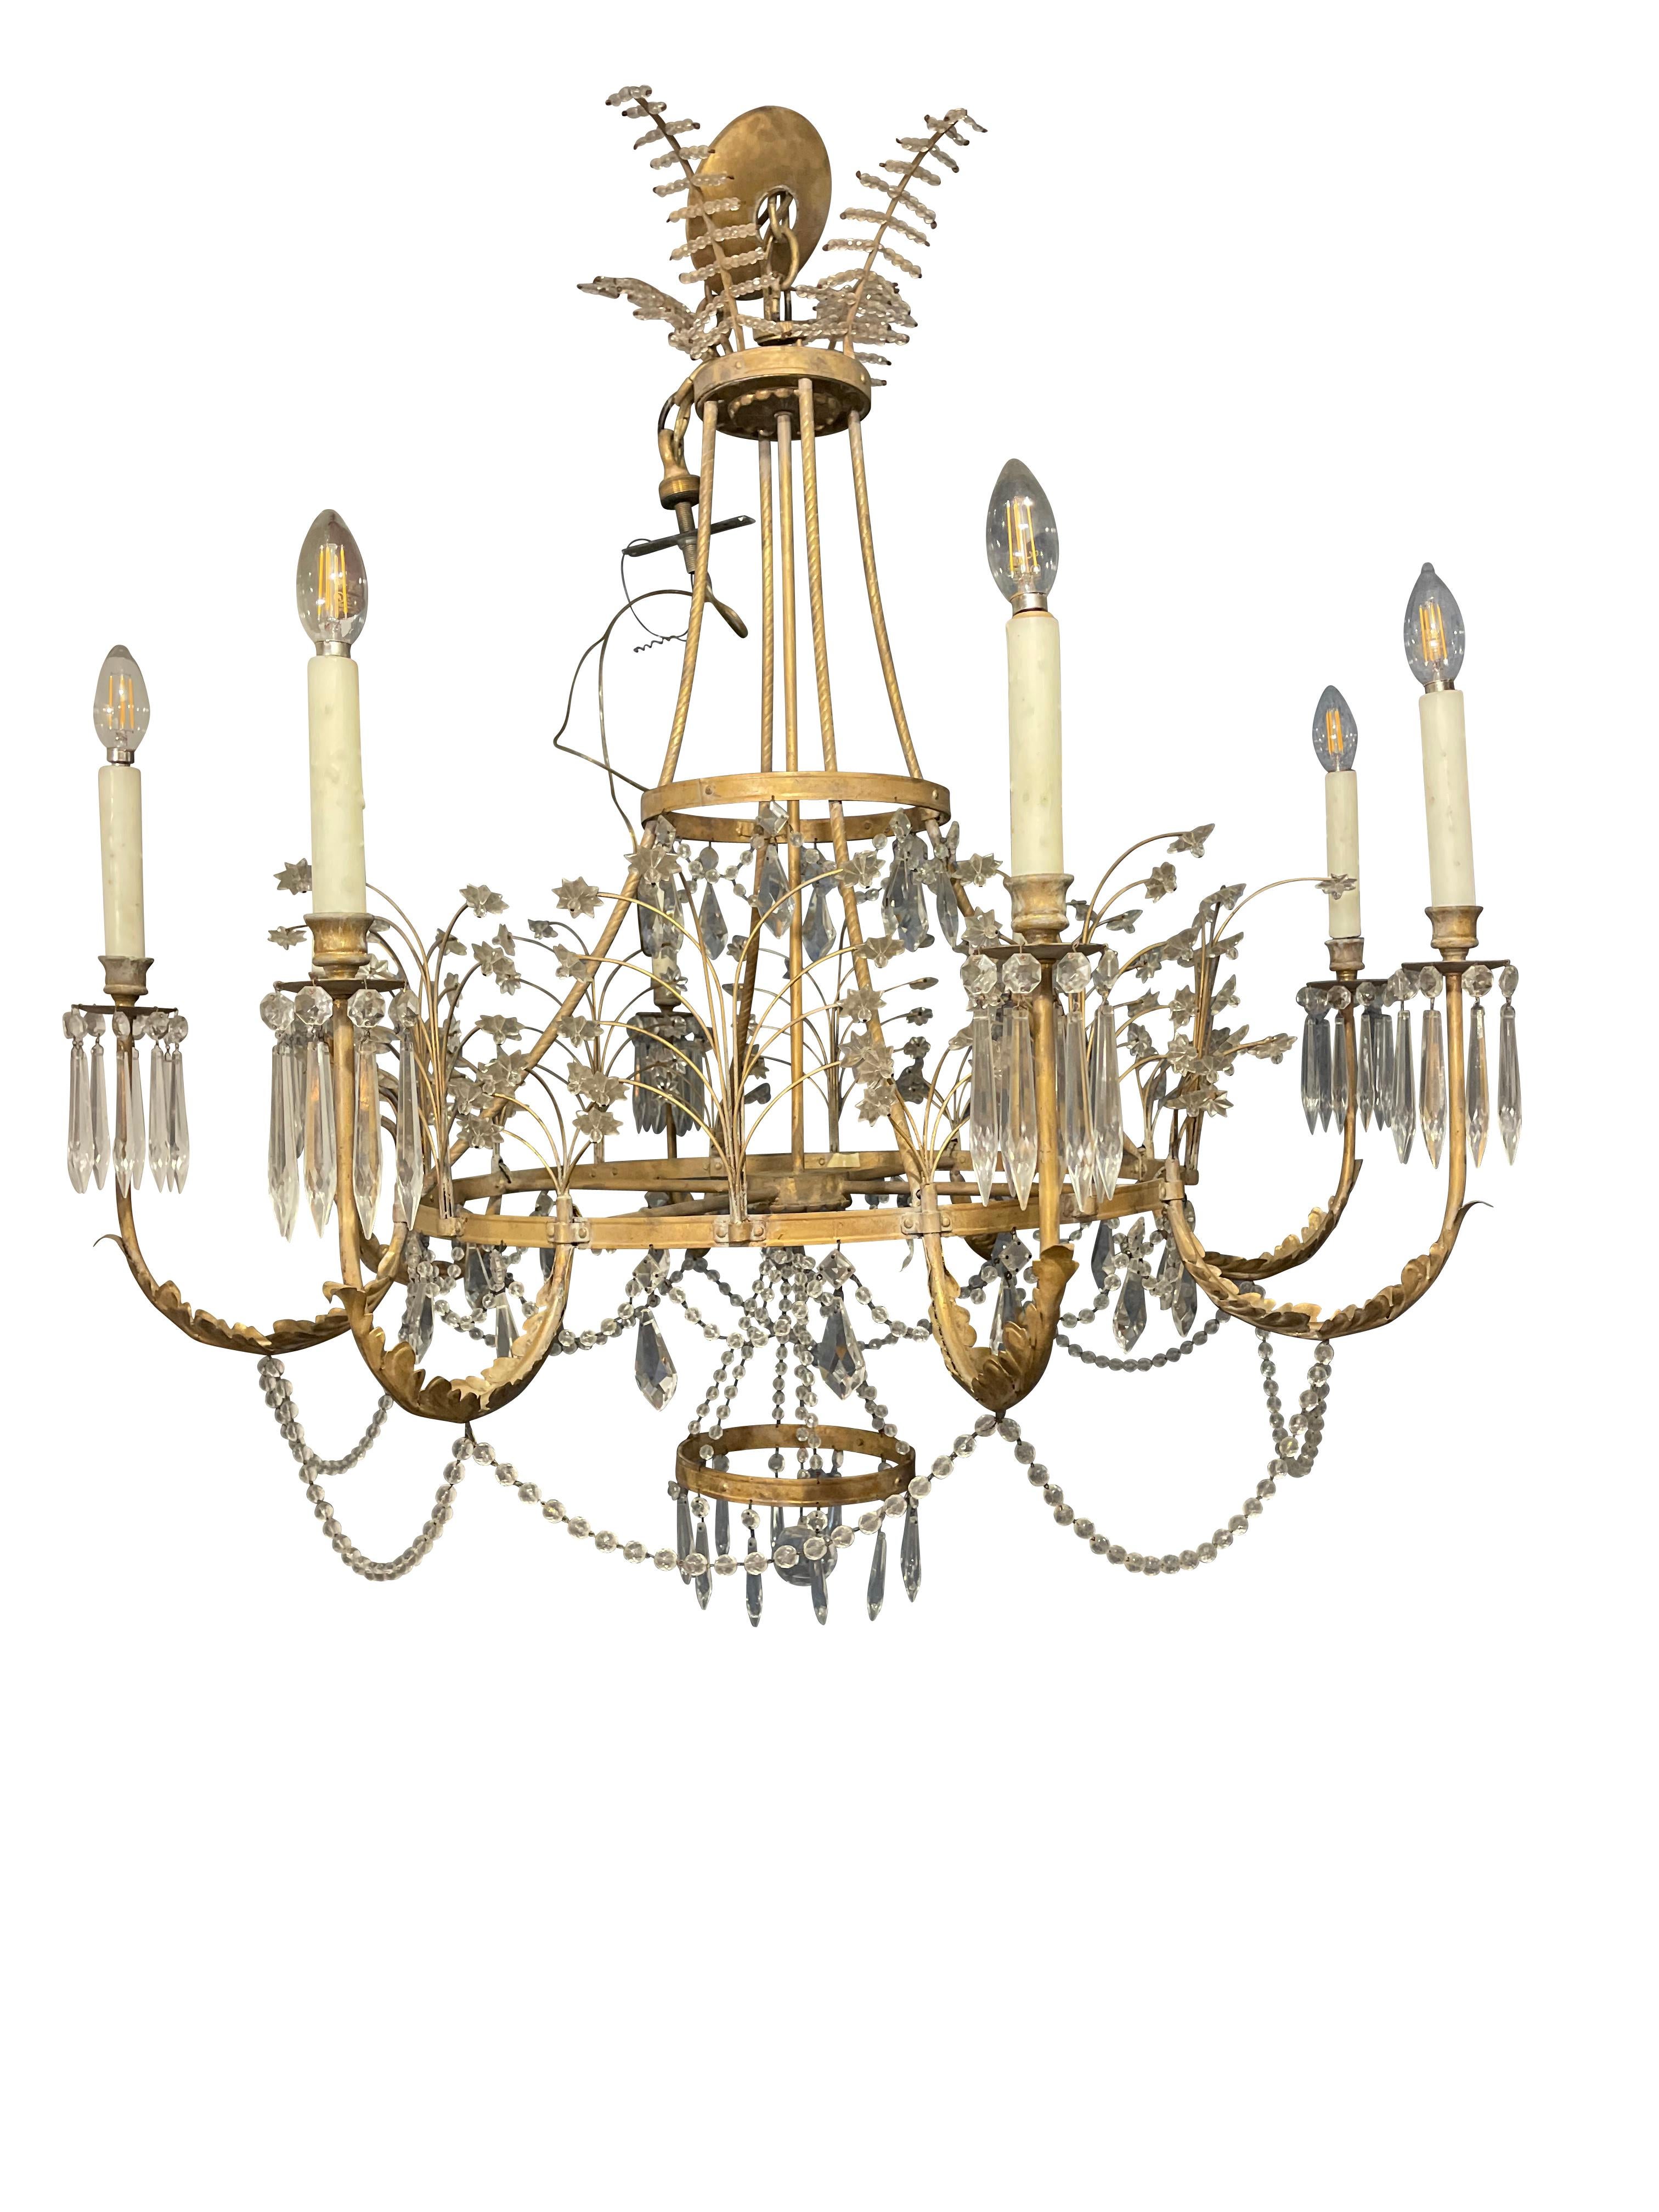 Hand-Crafted 20th Century Neoclassical Swedish Style Crystal and Gilt Bronze Chandelier  For Sale